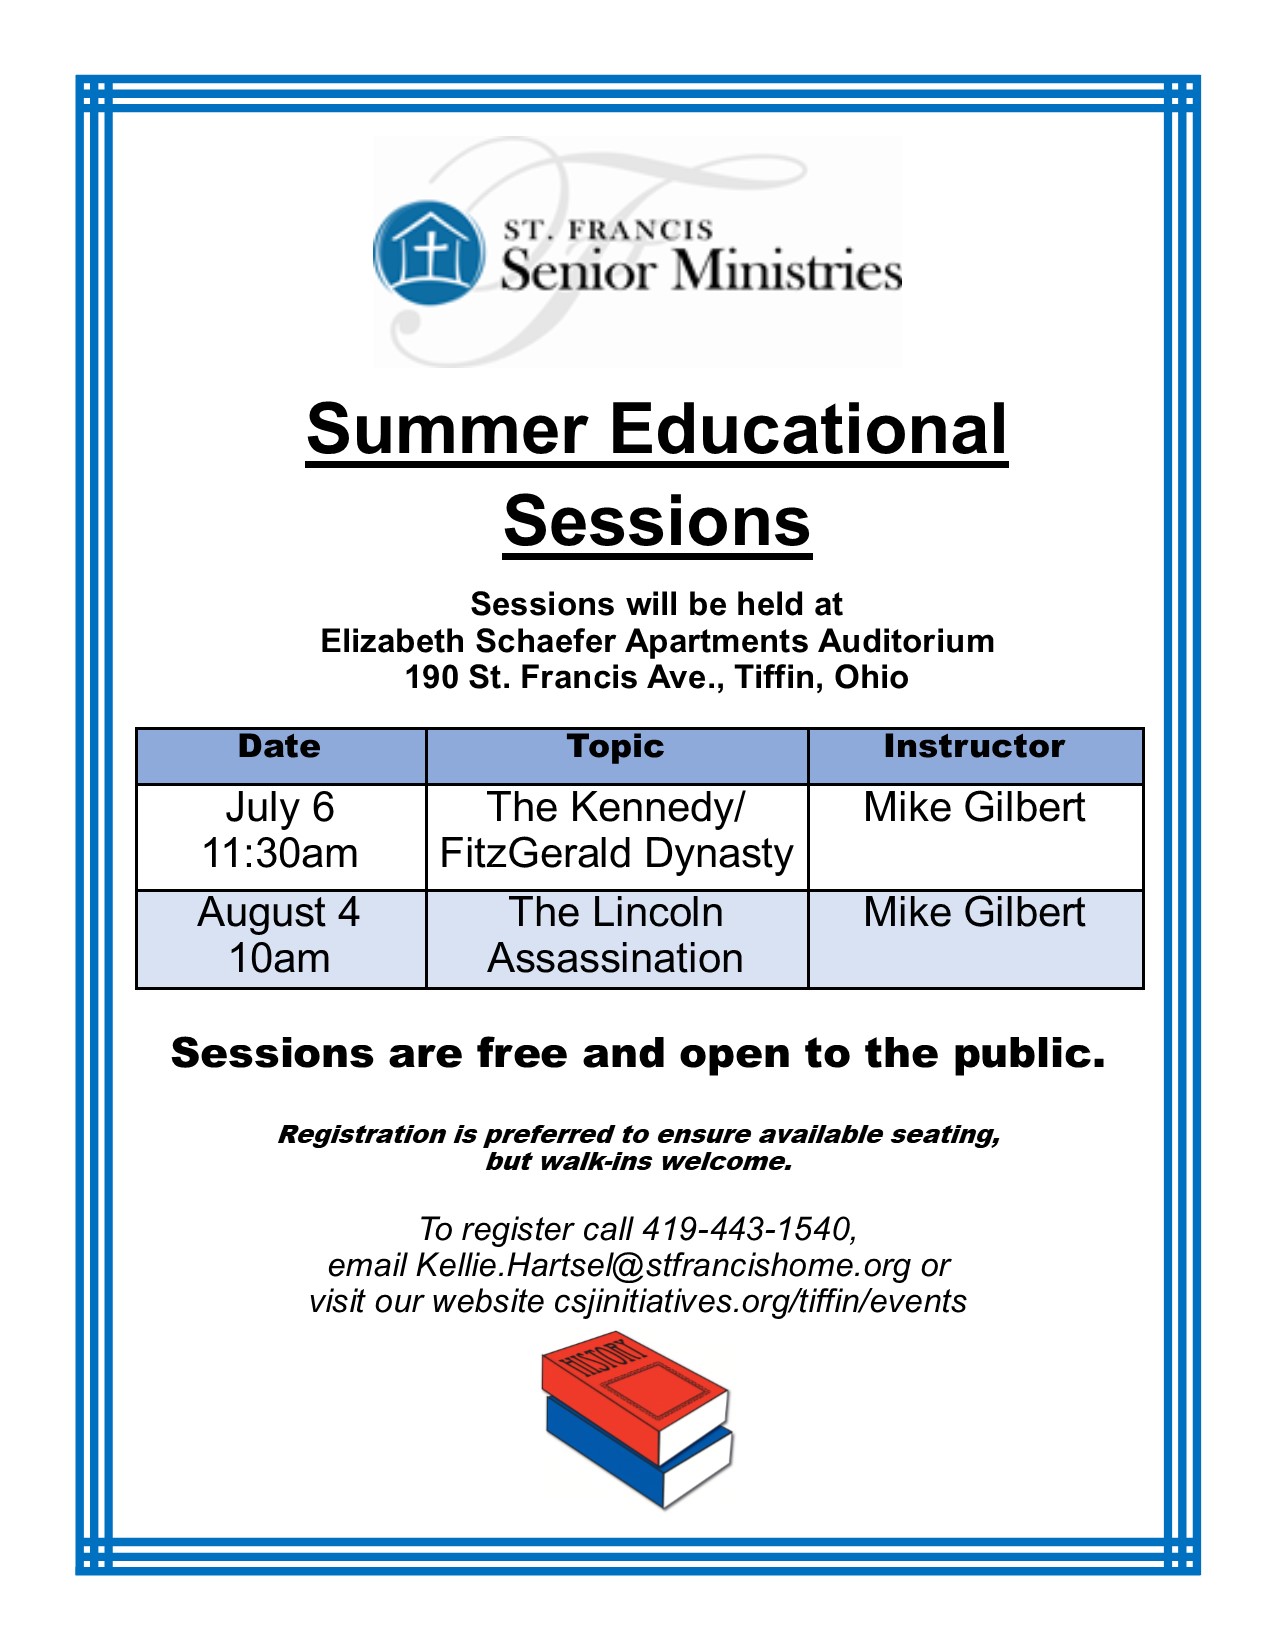 St. Francis Summer Educational Sessions | The Kennedy/FitzGerald Dynasty